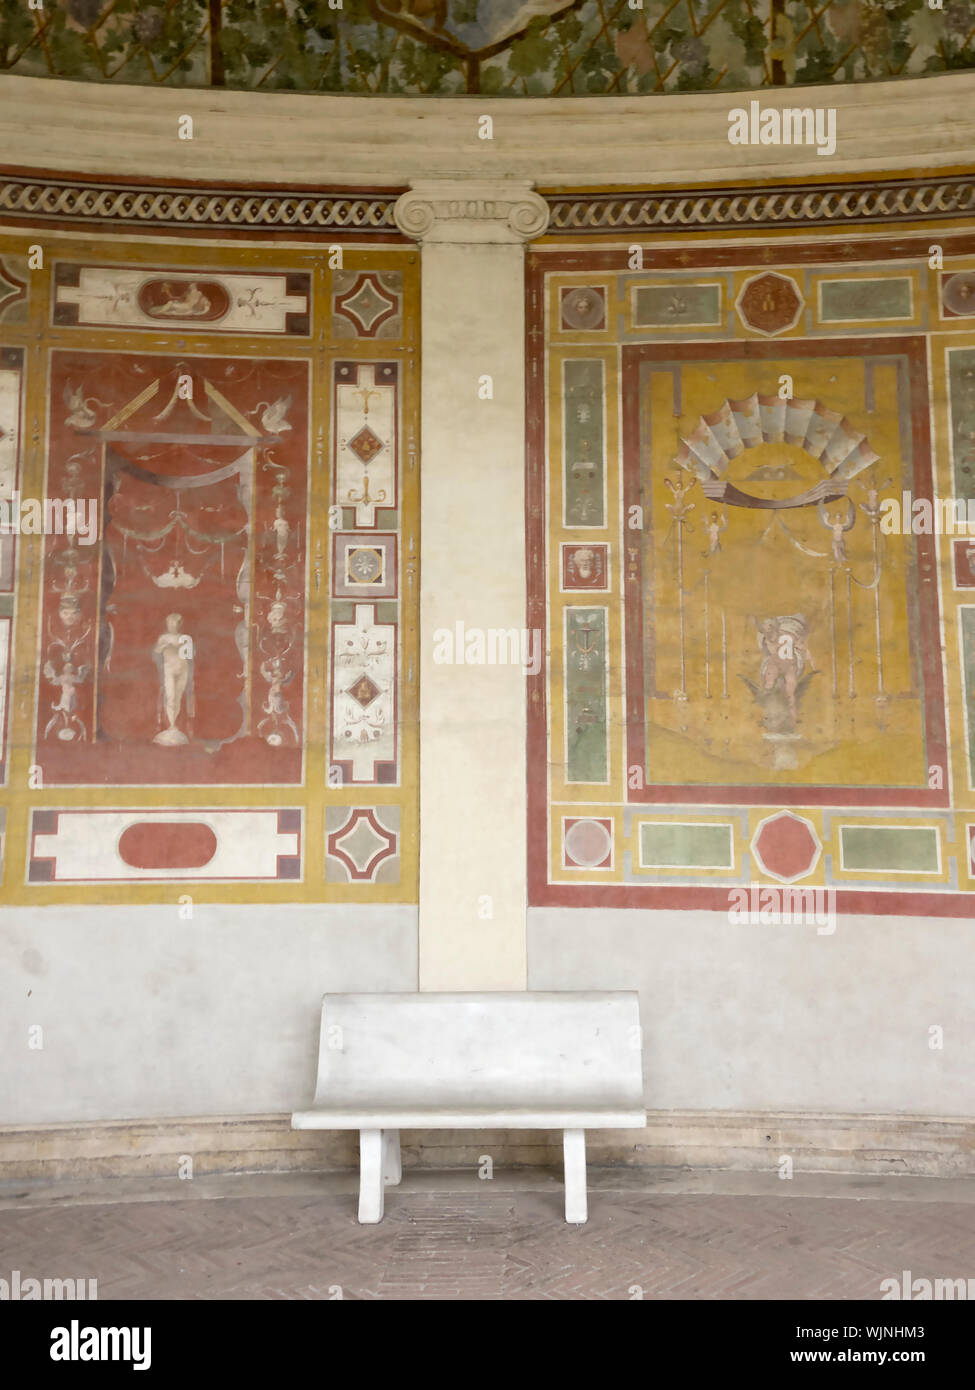 Frescoes in wall at Villa Giulia Etruscan Museum, Rome, 2019. Stock Photo